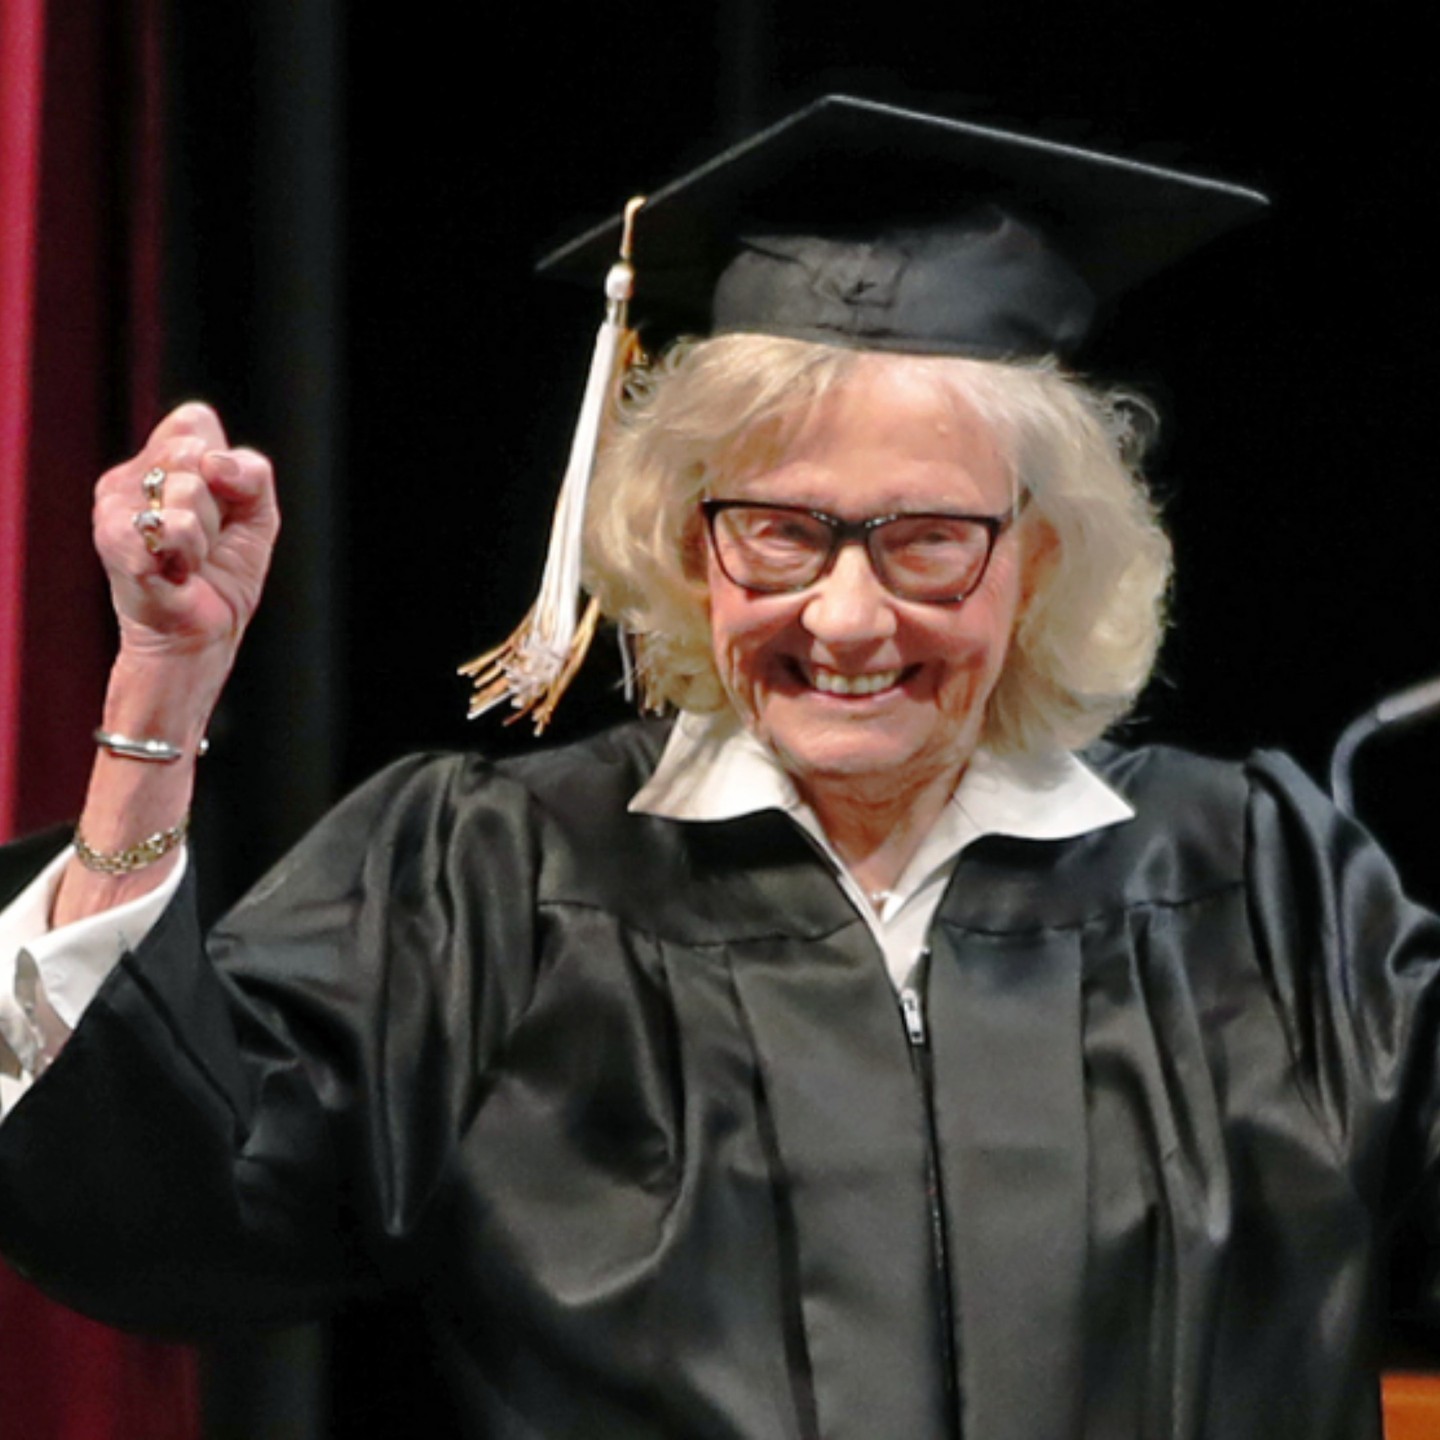 Betty Sandison smiling with her graduation gown at 84 years old